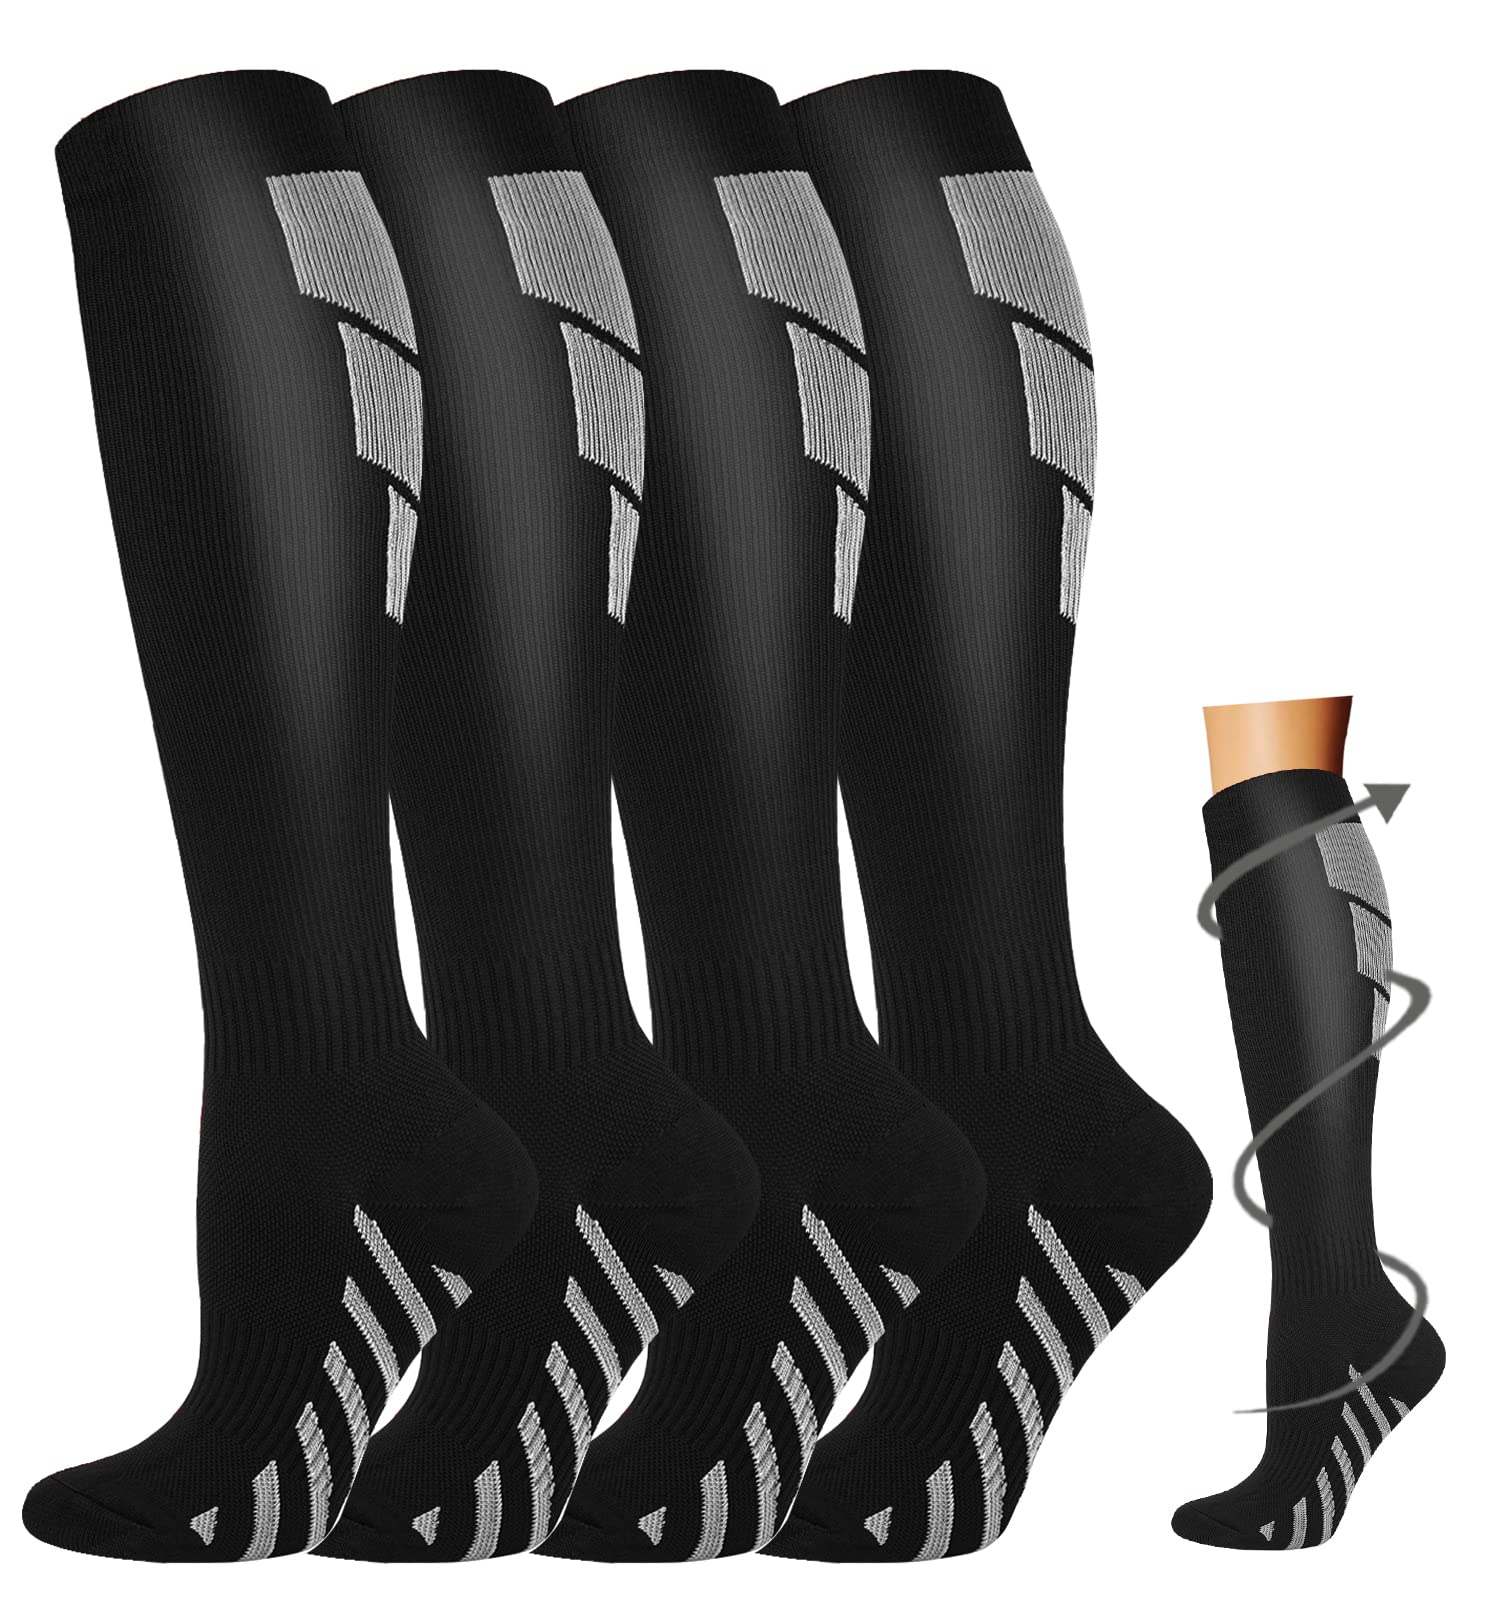 AcTINPUT compression Socks Men Women circulation-Best Support for Nurses Running cycling(A3 - Blackgrey LargeX-Large)